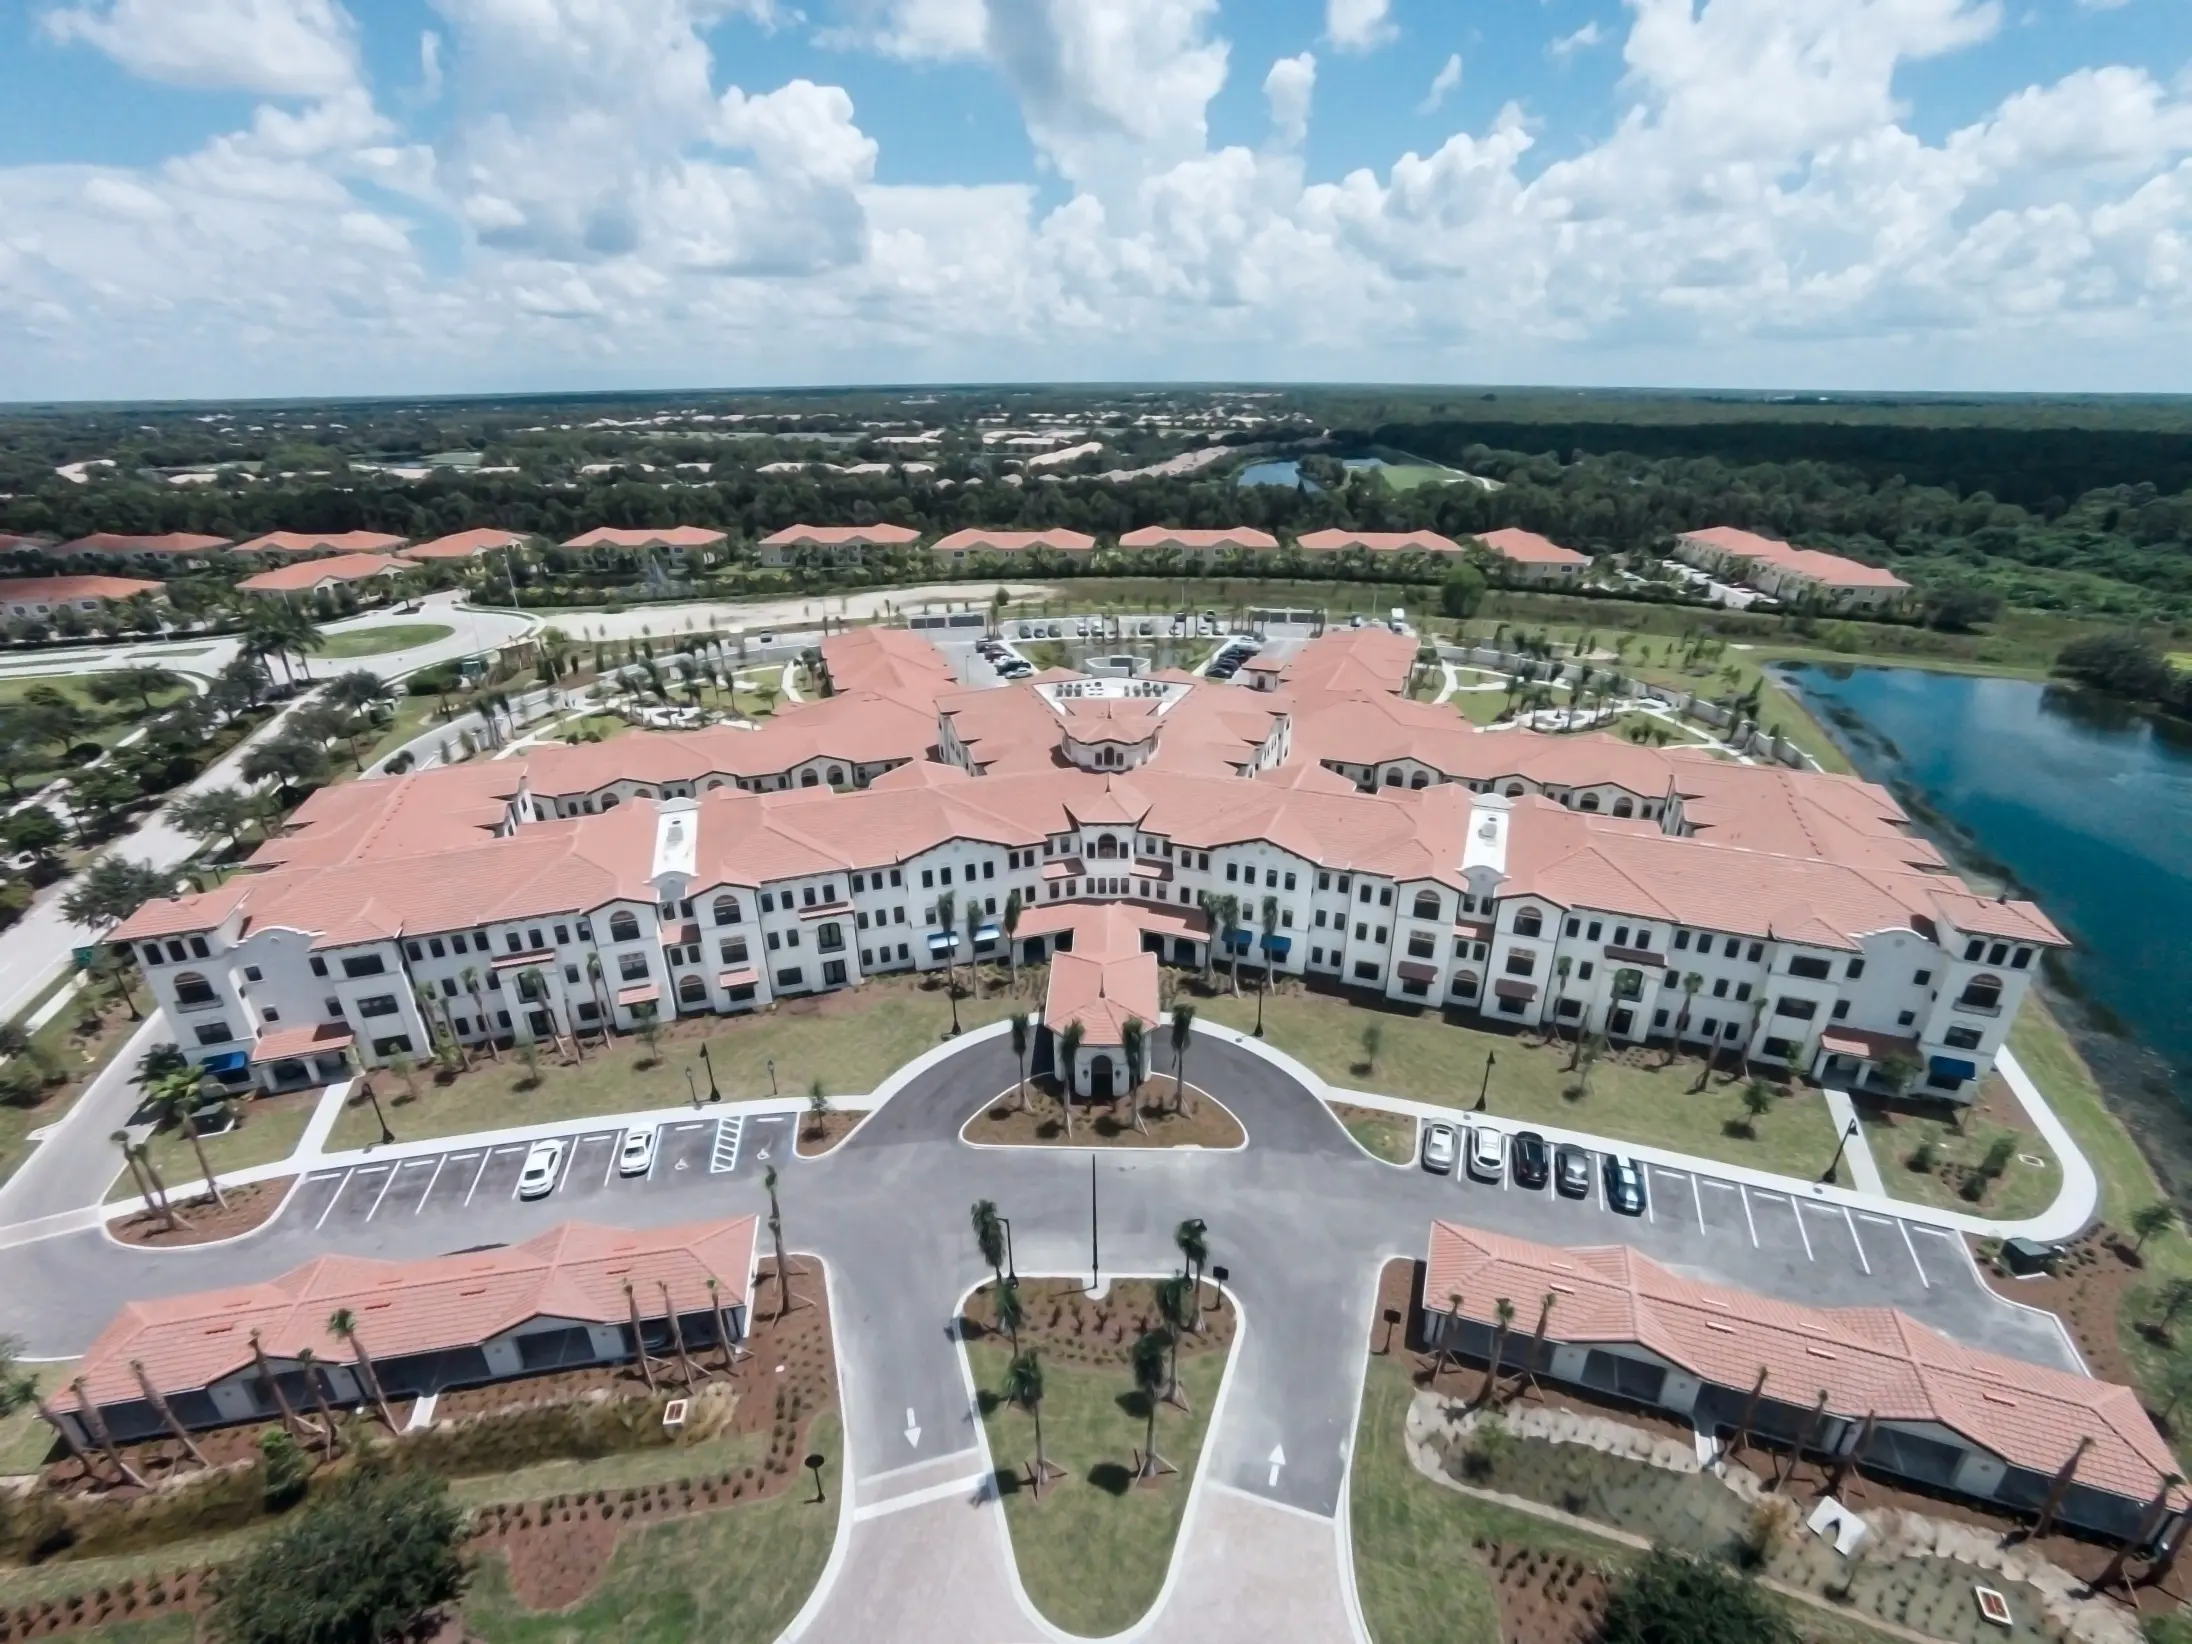 Bird's eye view of American House Coconut Point, a senior living community in Estero, FL